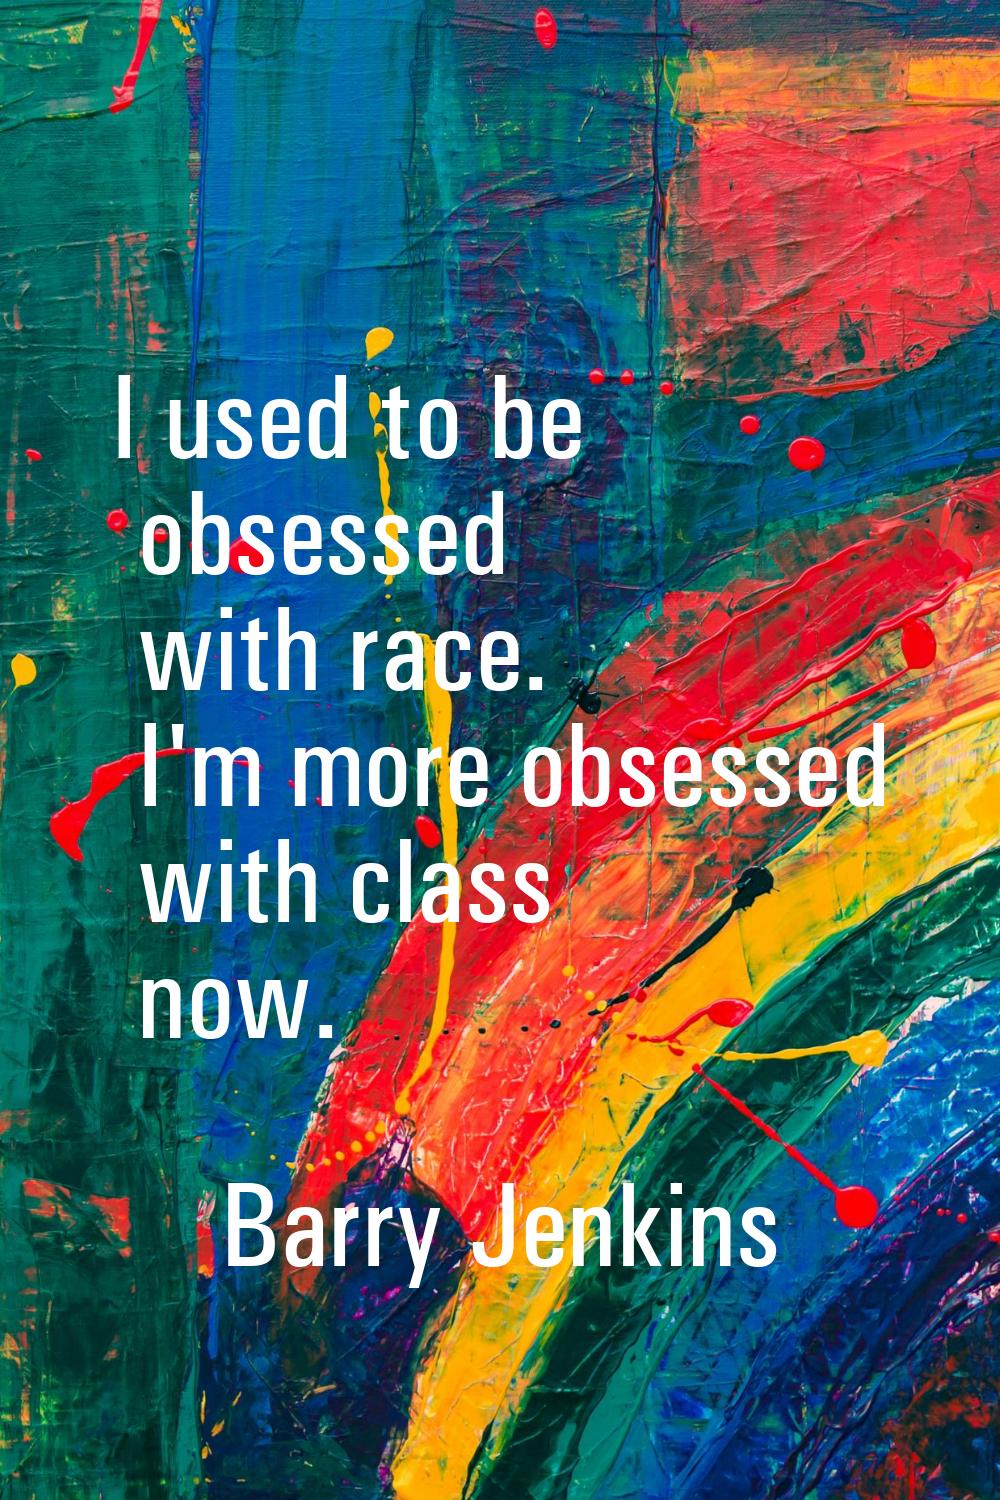 I used to be obsessed with race. I'm more obsessed with class now.